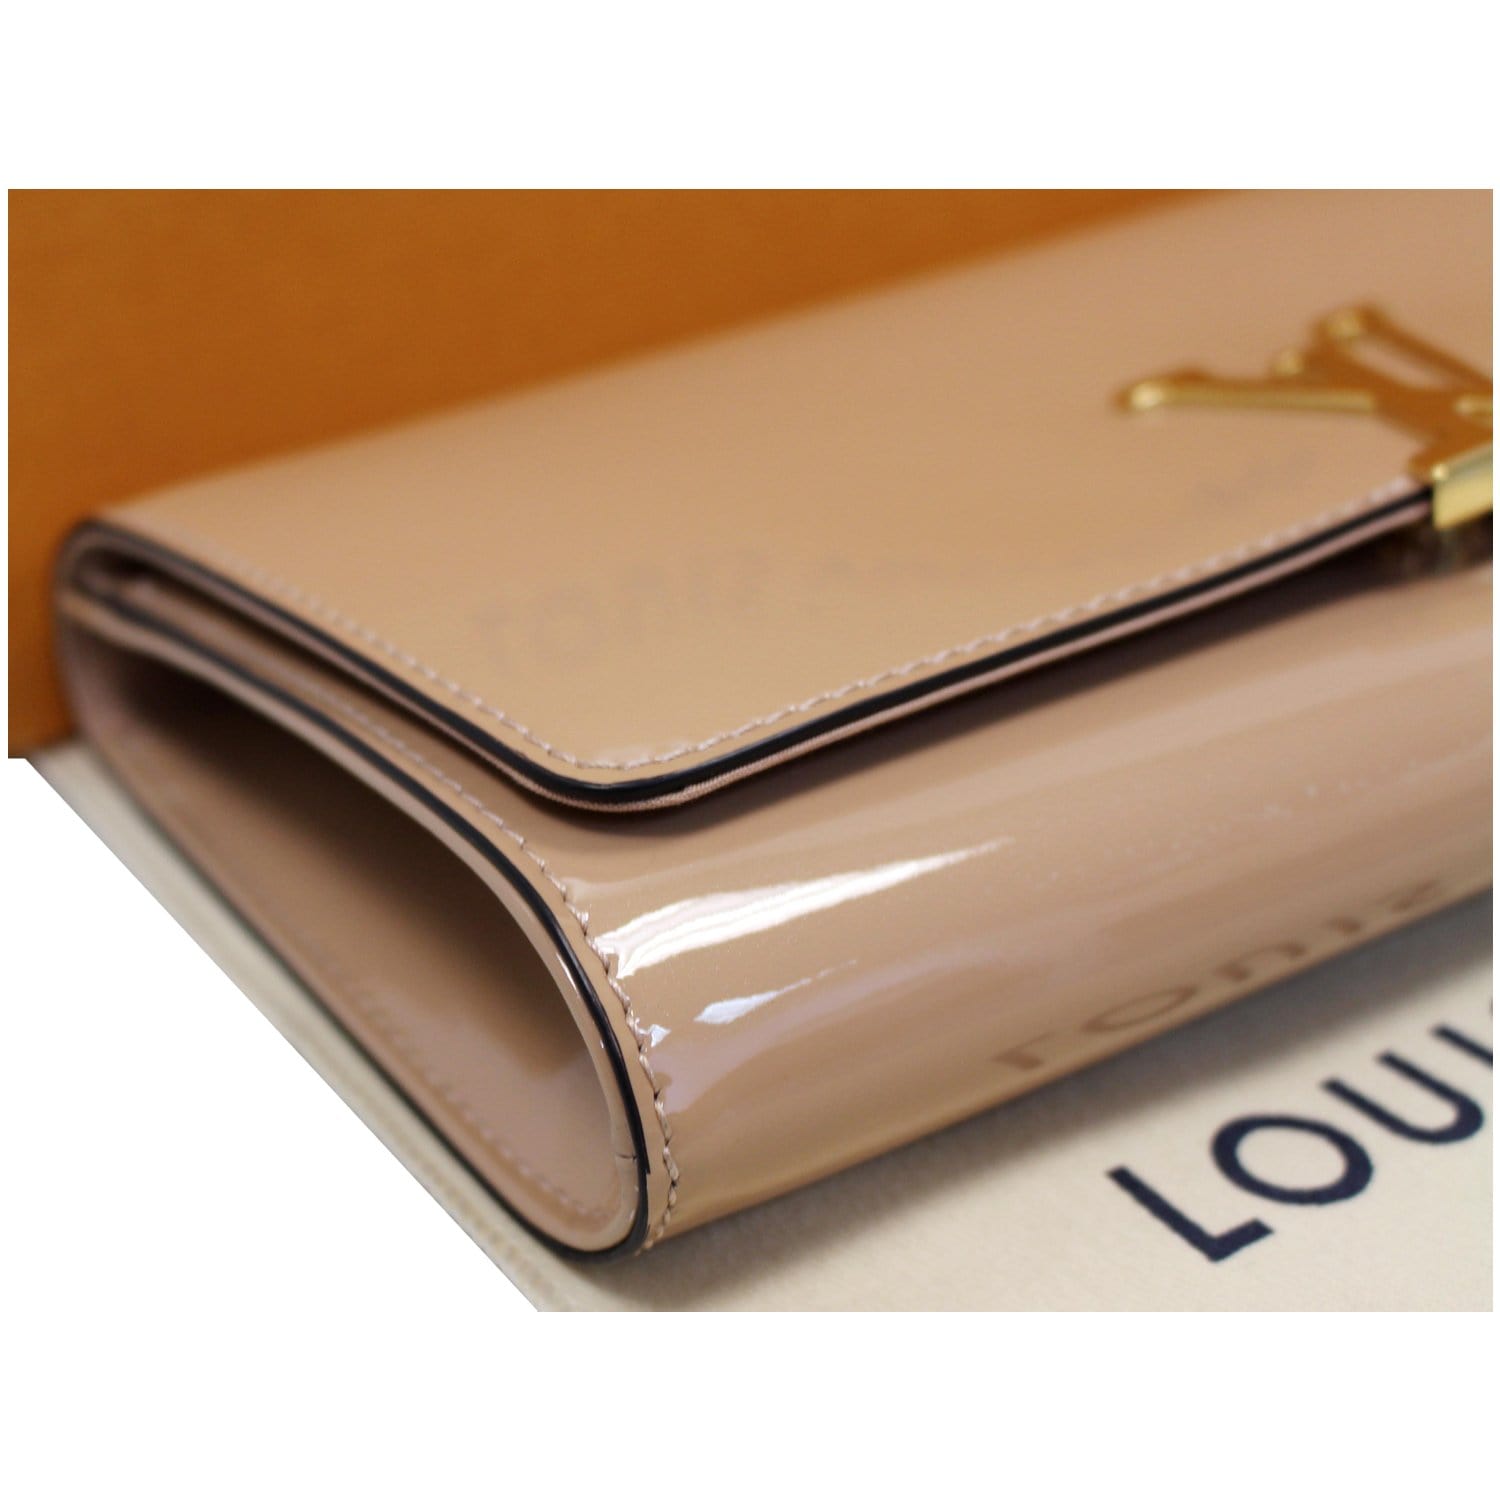 LOUIS VUITTON PATENT LEATHER WALLET for Sale in Oceanside, CA - OfferUp